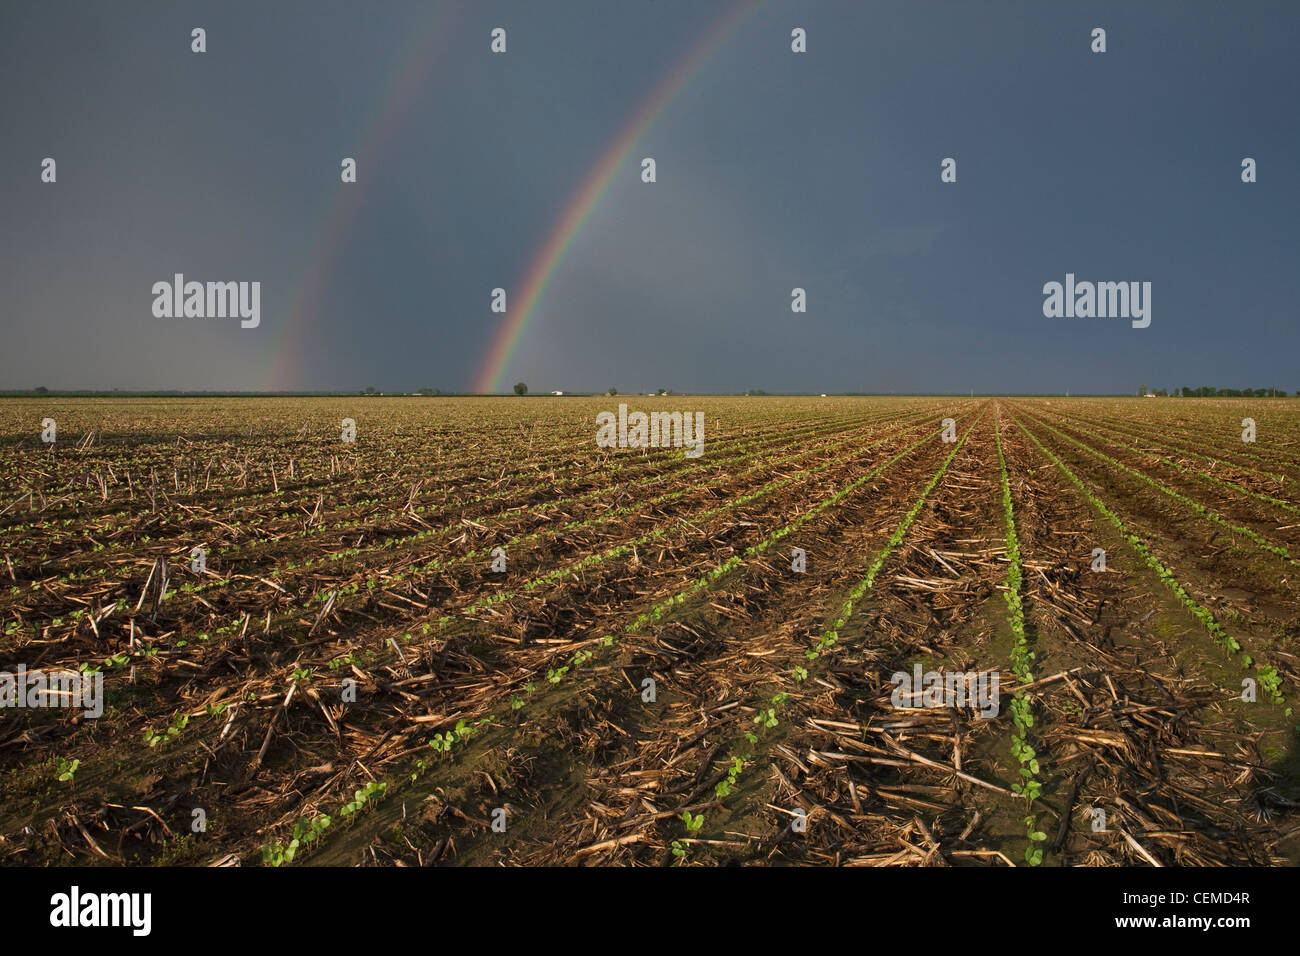 Agriculture - Field of cotton seedlings in mid Spring with a dark, stormy sky and rainbow in the background / Arkansas, USA. Stock Photo